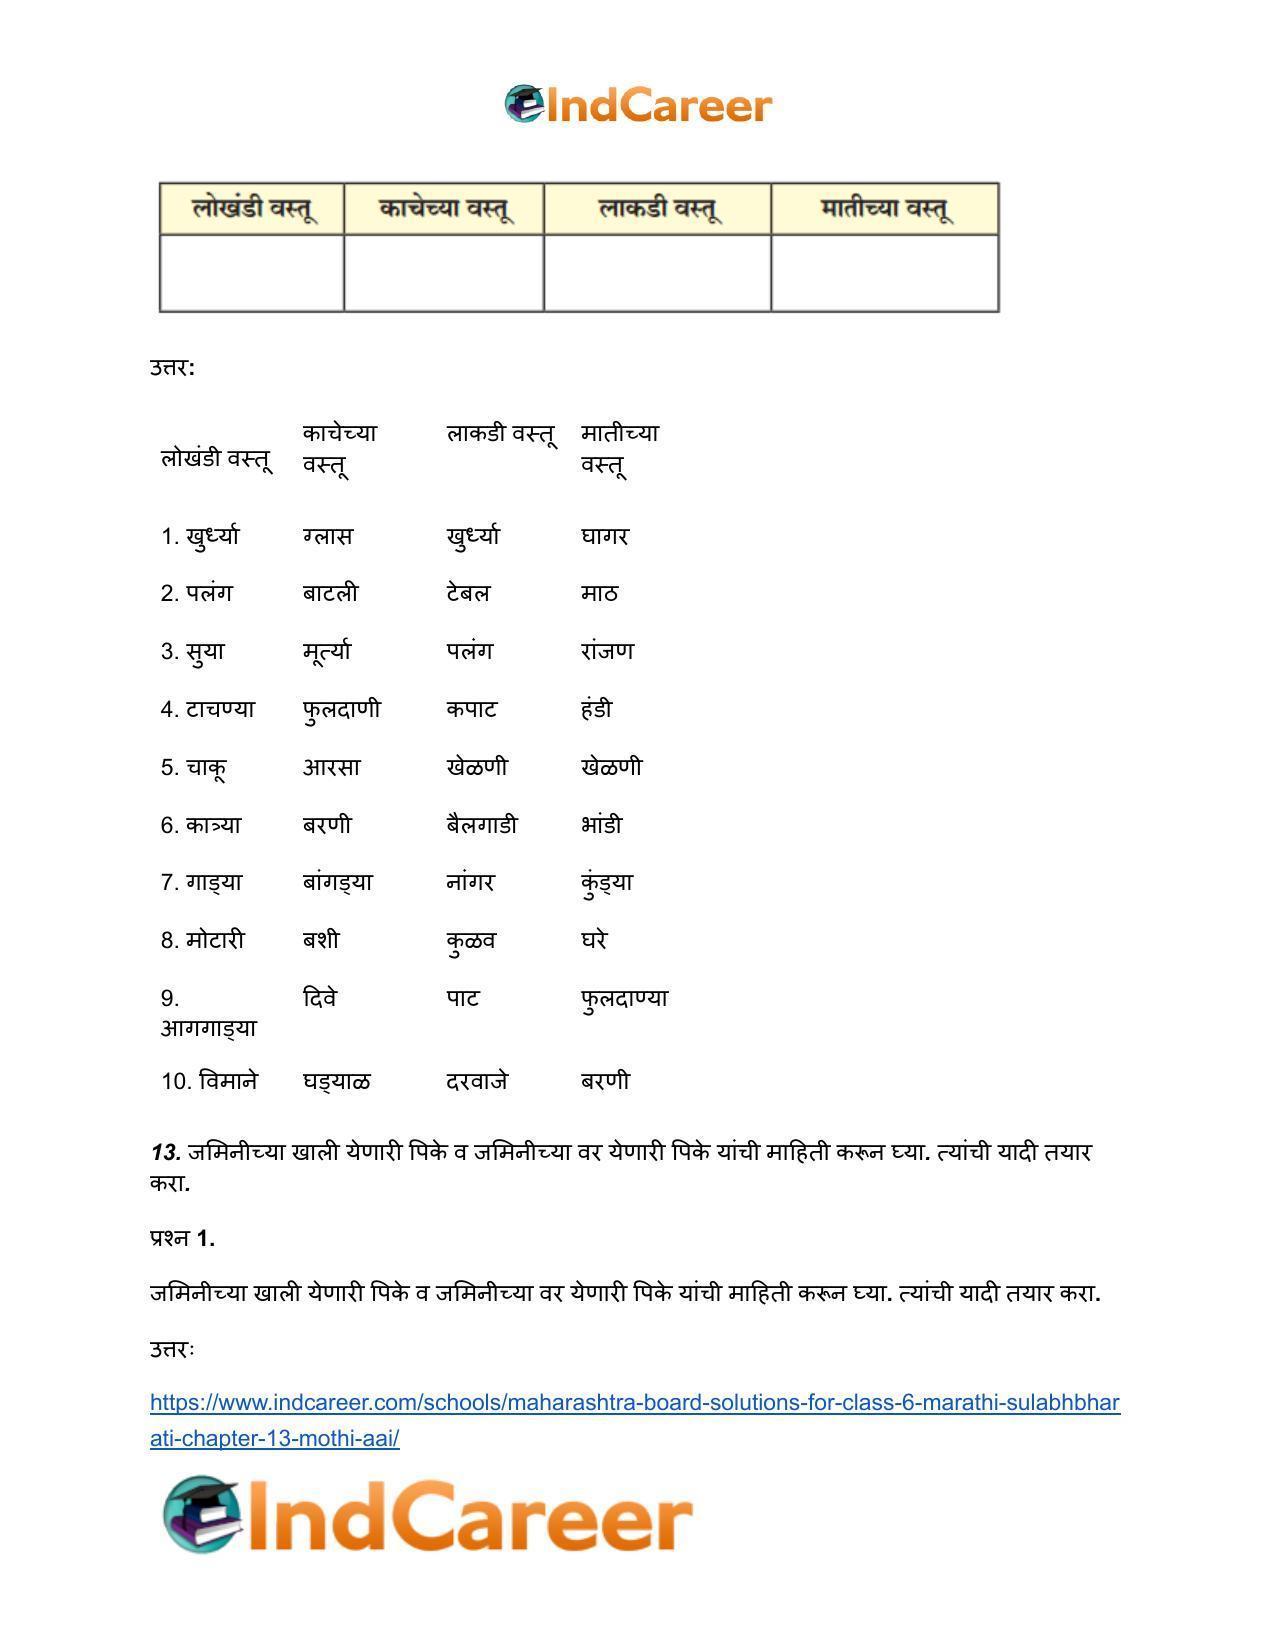 Maharashtra Board Solutions for Class 6- Marathi Sulabhbharati: Chapter 13- मोठी आई - Page 8